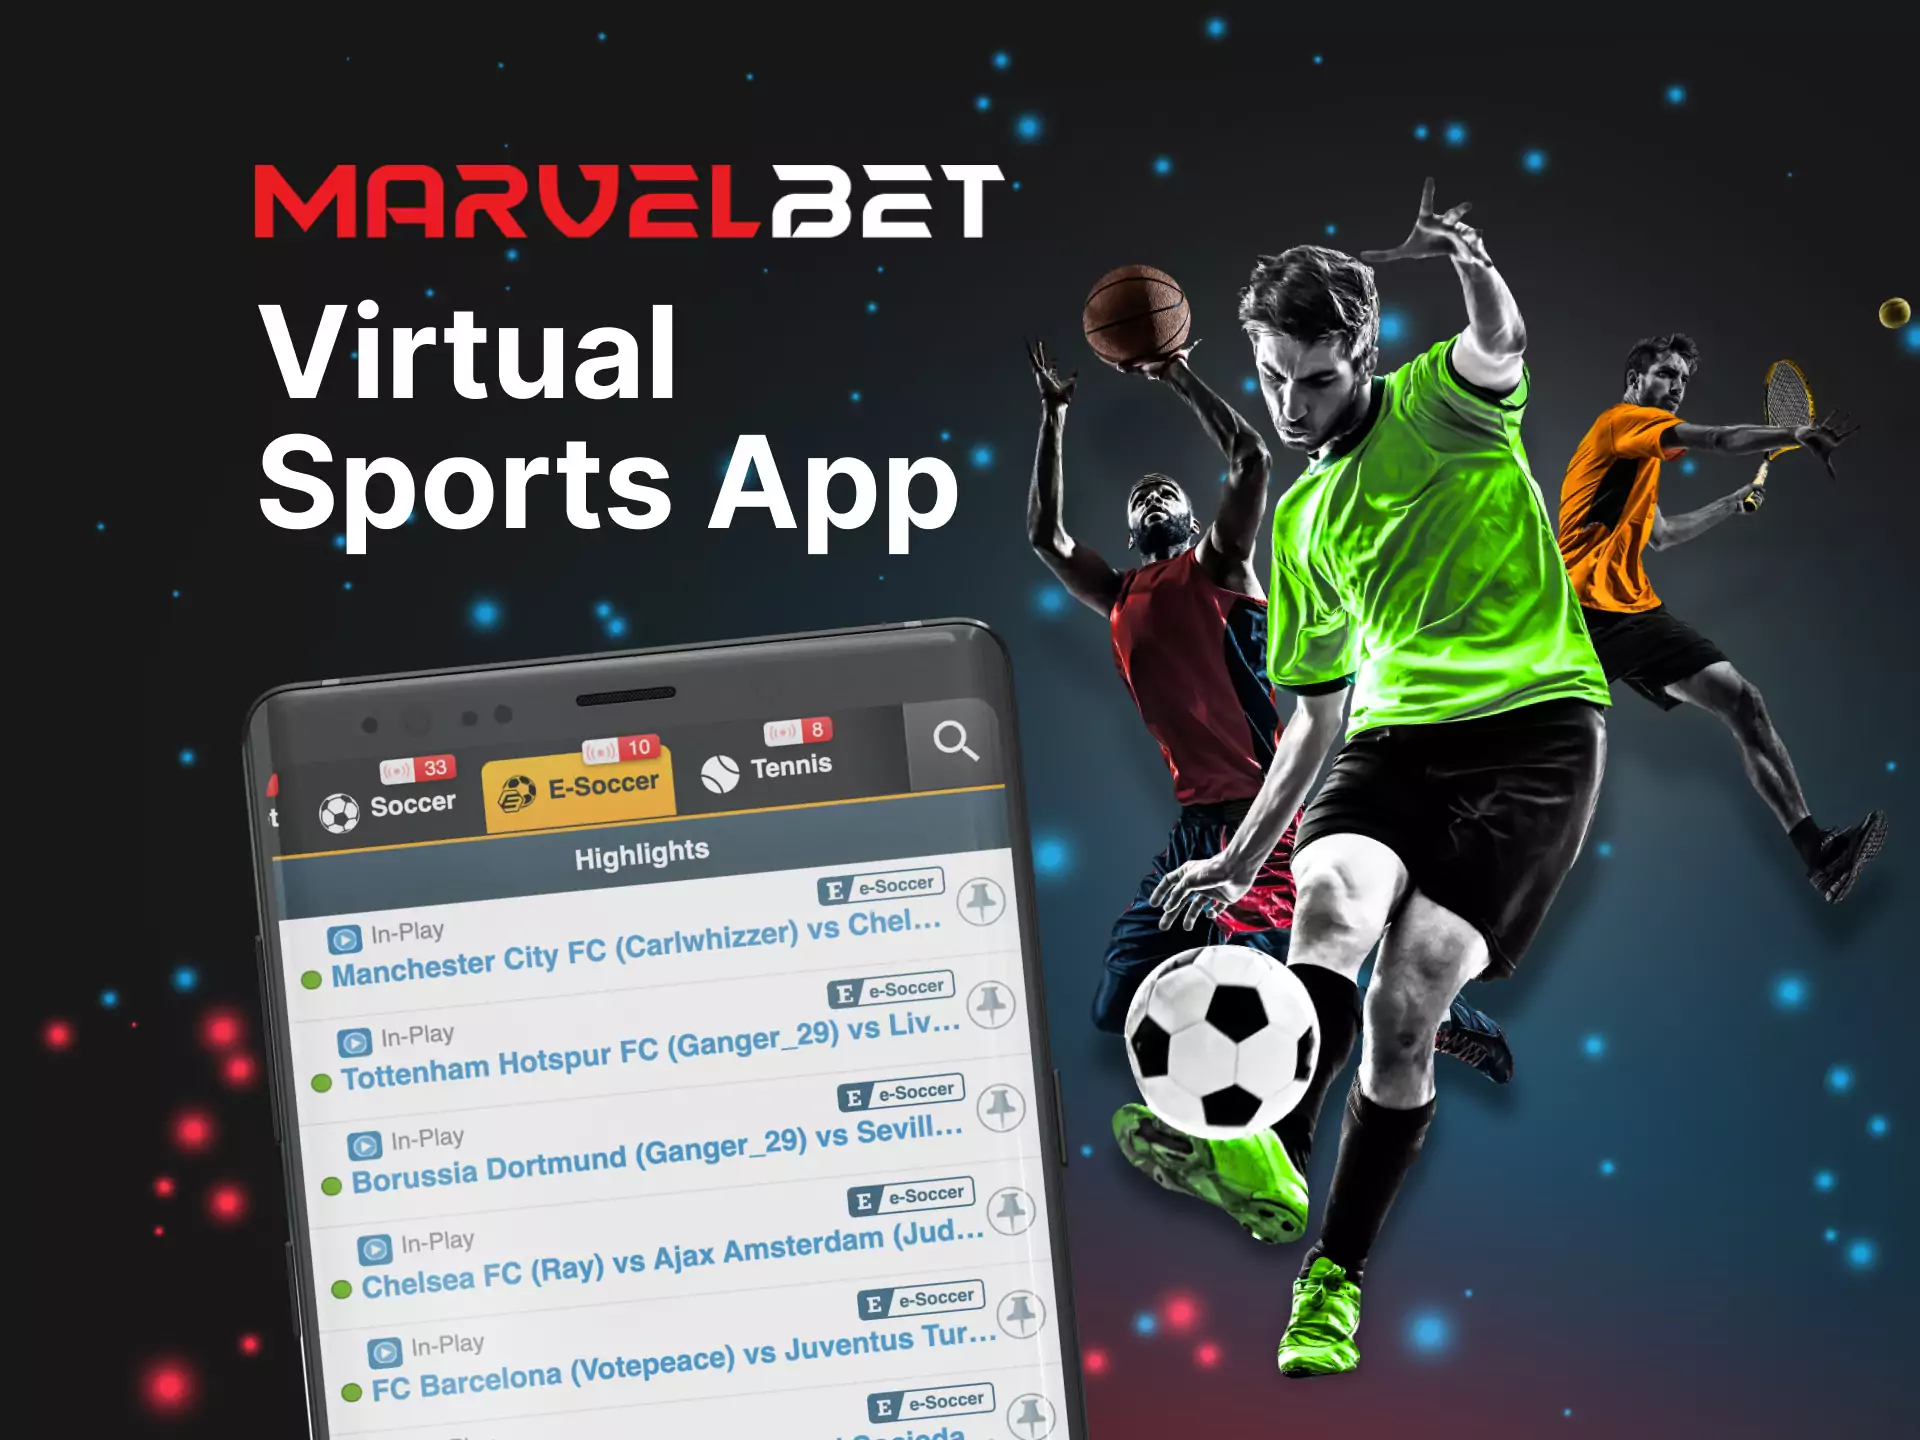 Besides real matches, you can place bets on virtual sports in the Marvelbet app.